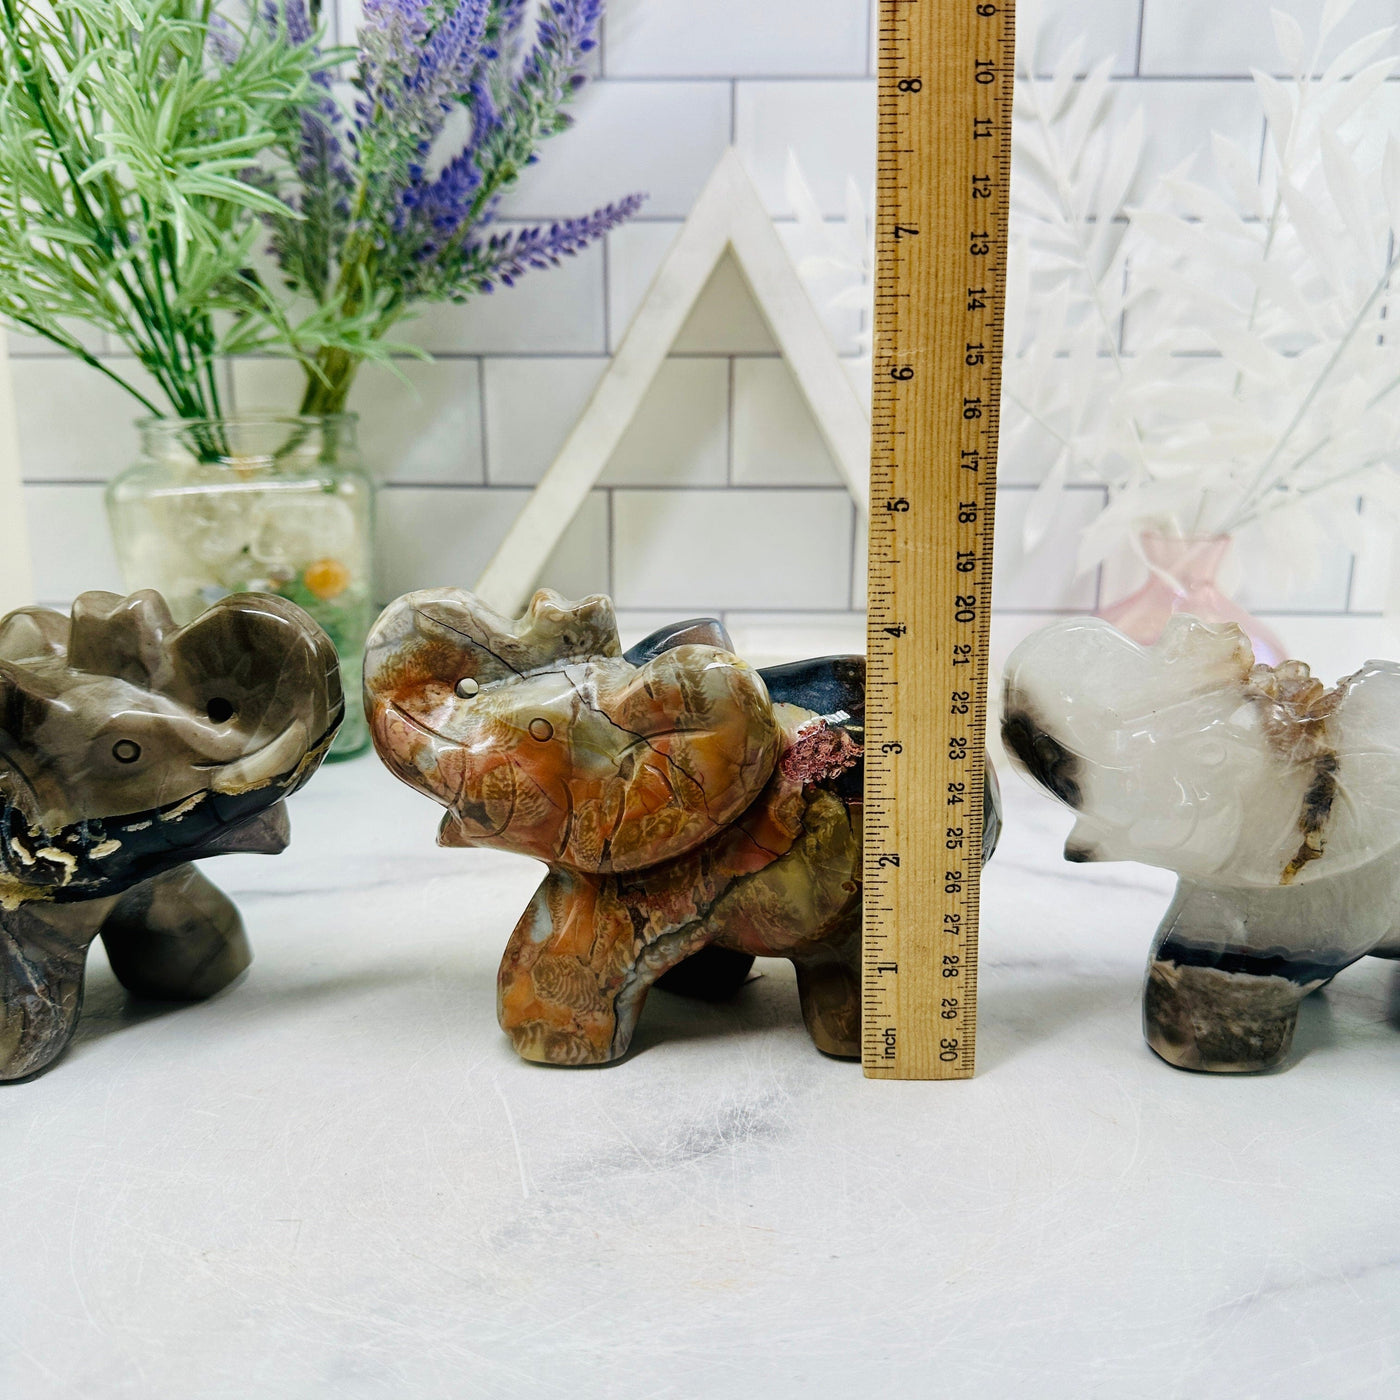 Lava Agate Crystal Carved Elephants - YOU CHOOSE all elephants with ruler standing up for size reference